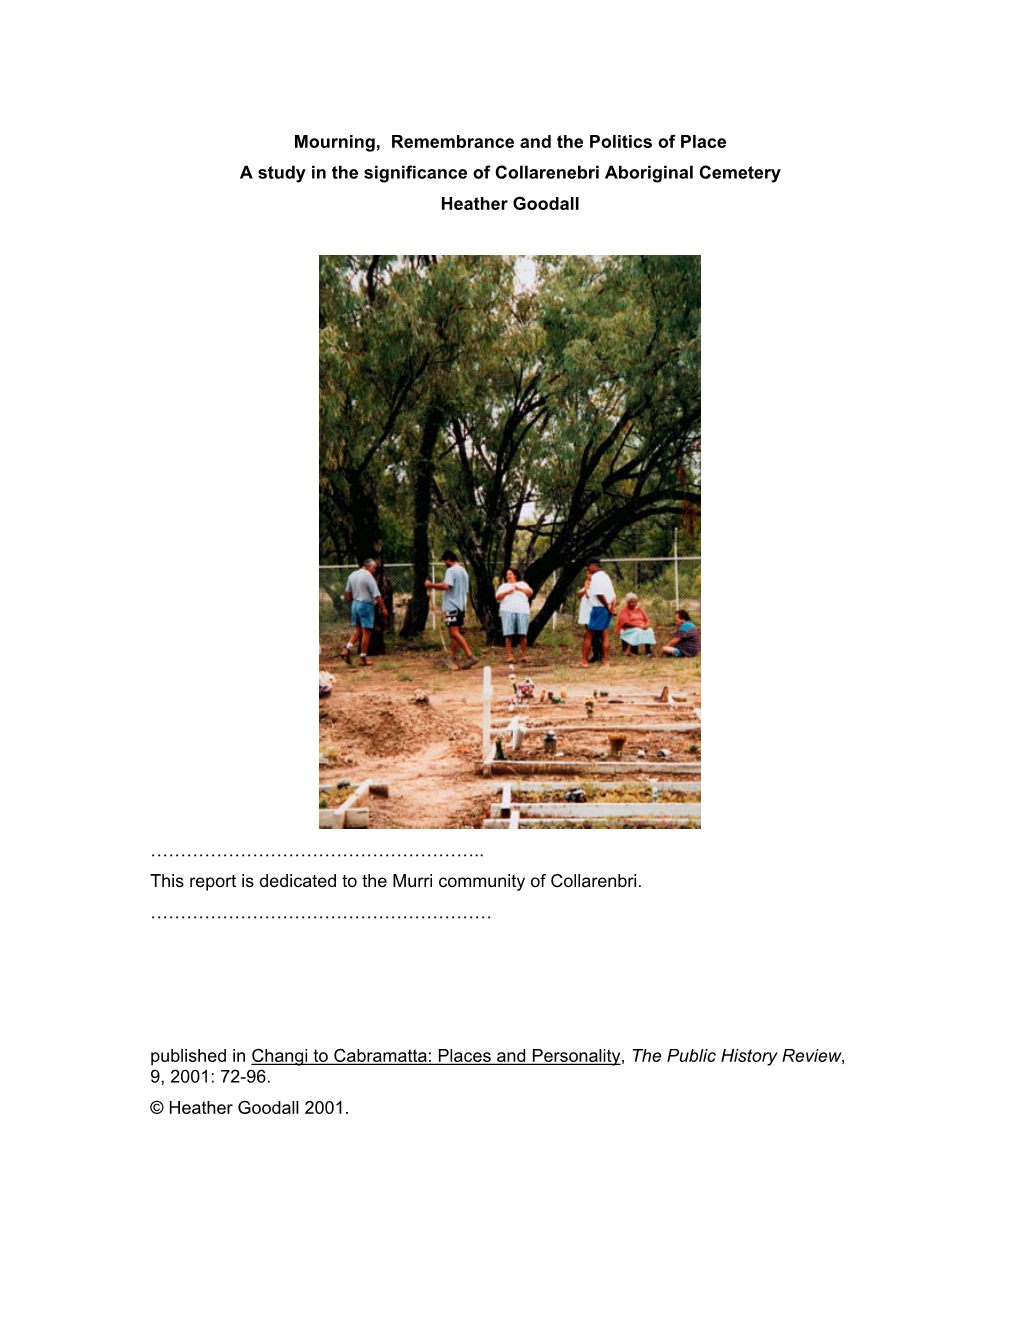 Mourning, Remembrance and the Politics of Place a Study in the Significance of Collarenebri Aboriginal Cemetery Heather Goodall